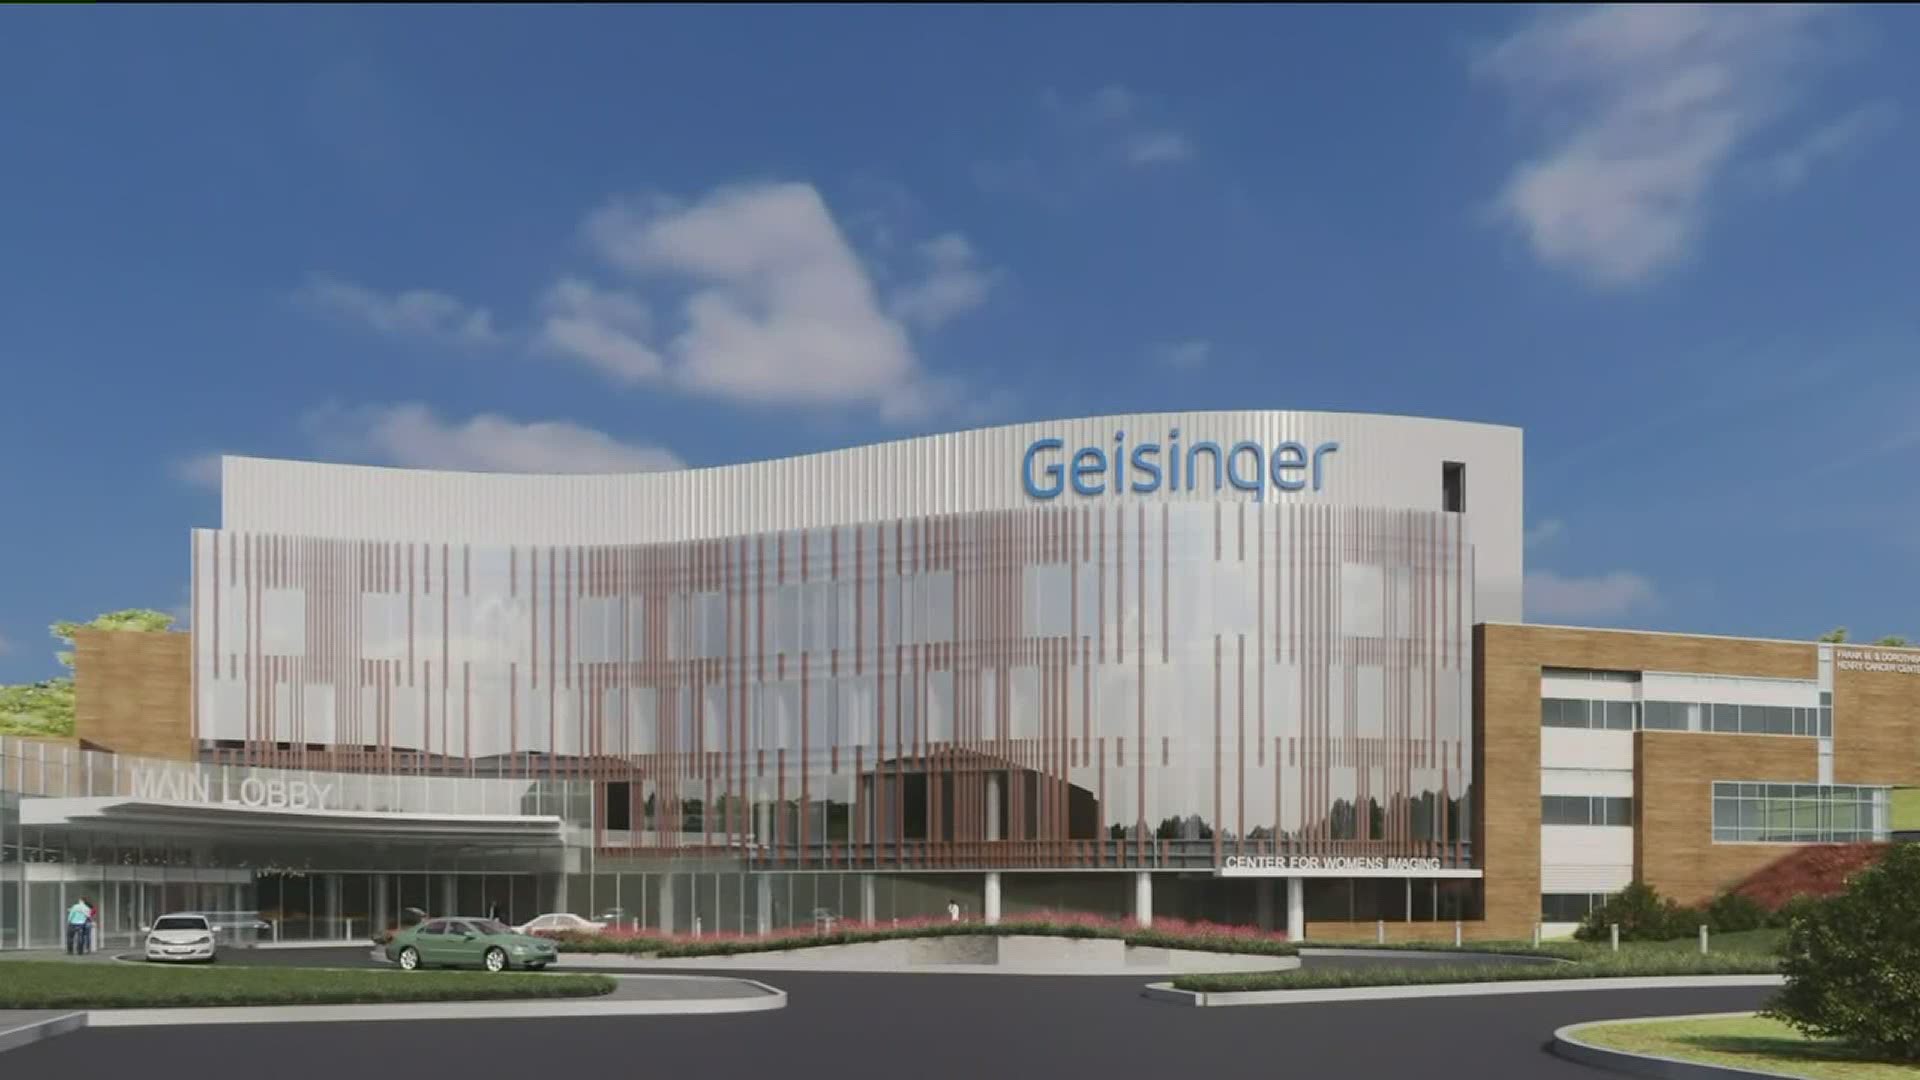 The $80 million expansion will add more than 92,000 square feet to the hospital.